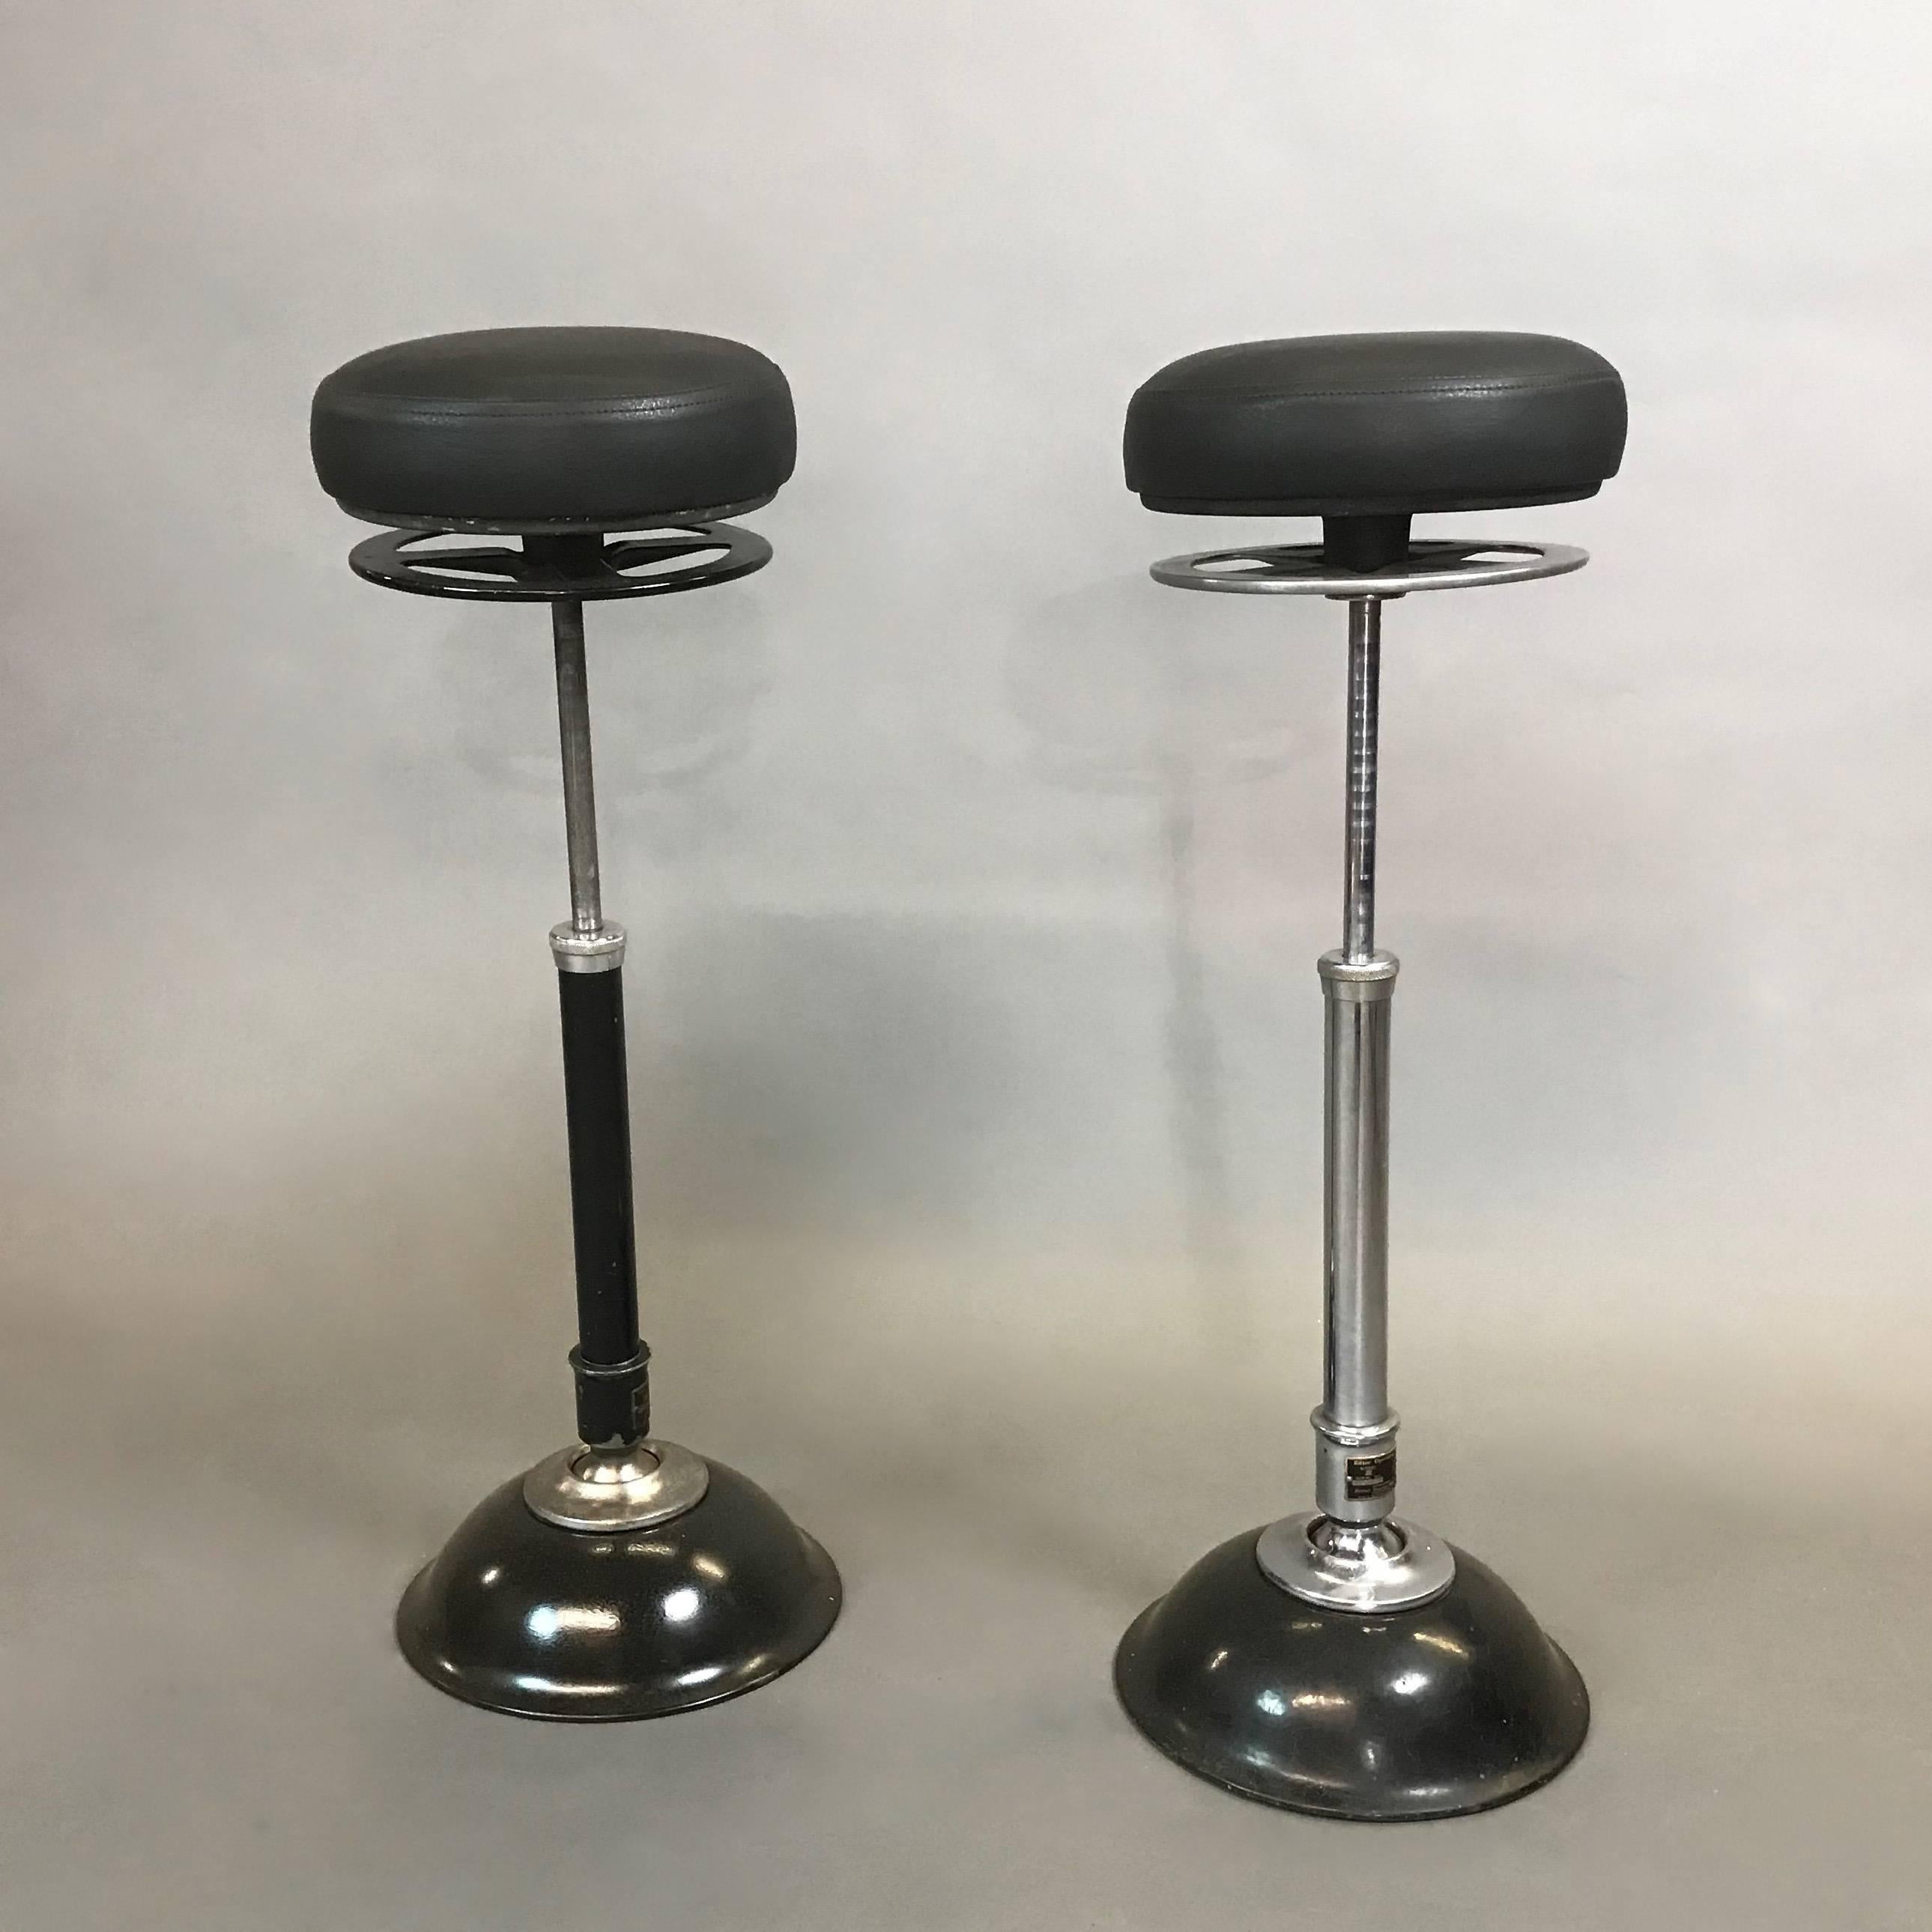 American Industrial Adjustable Articulating Leather Medical Stool